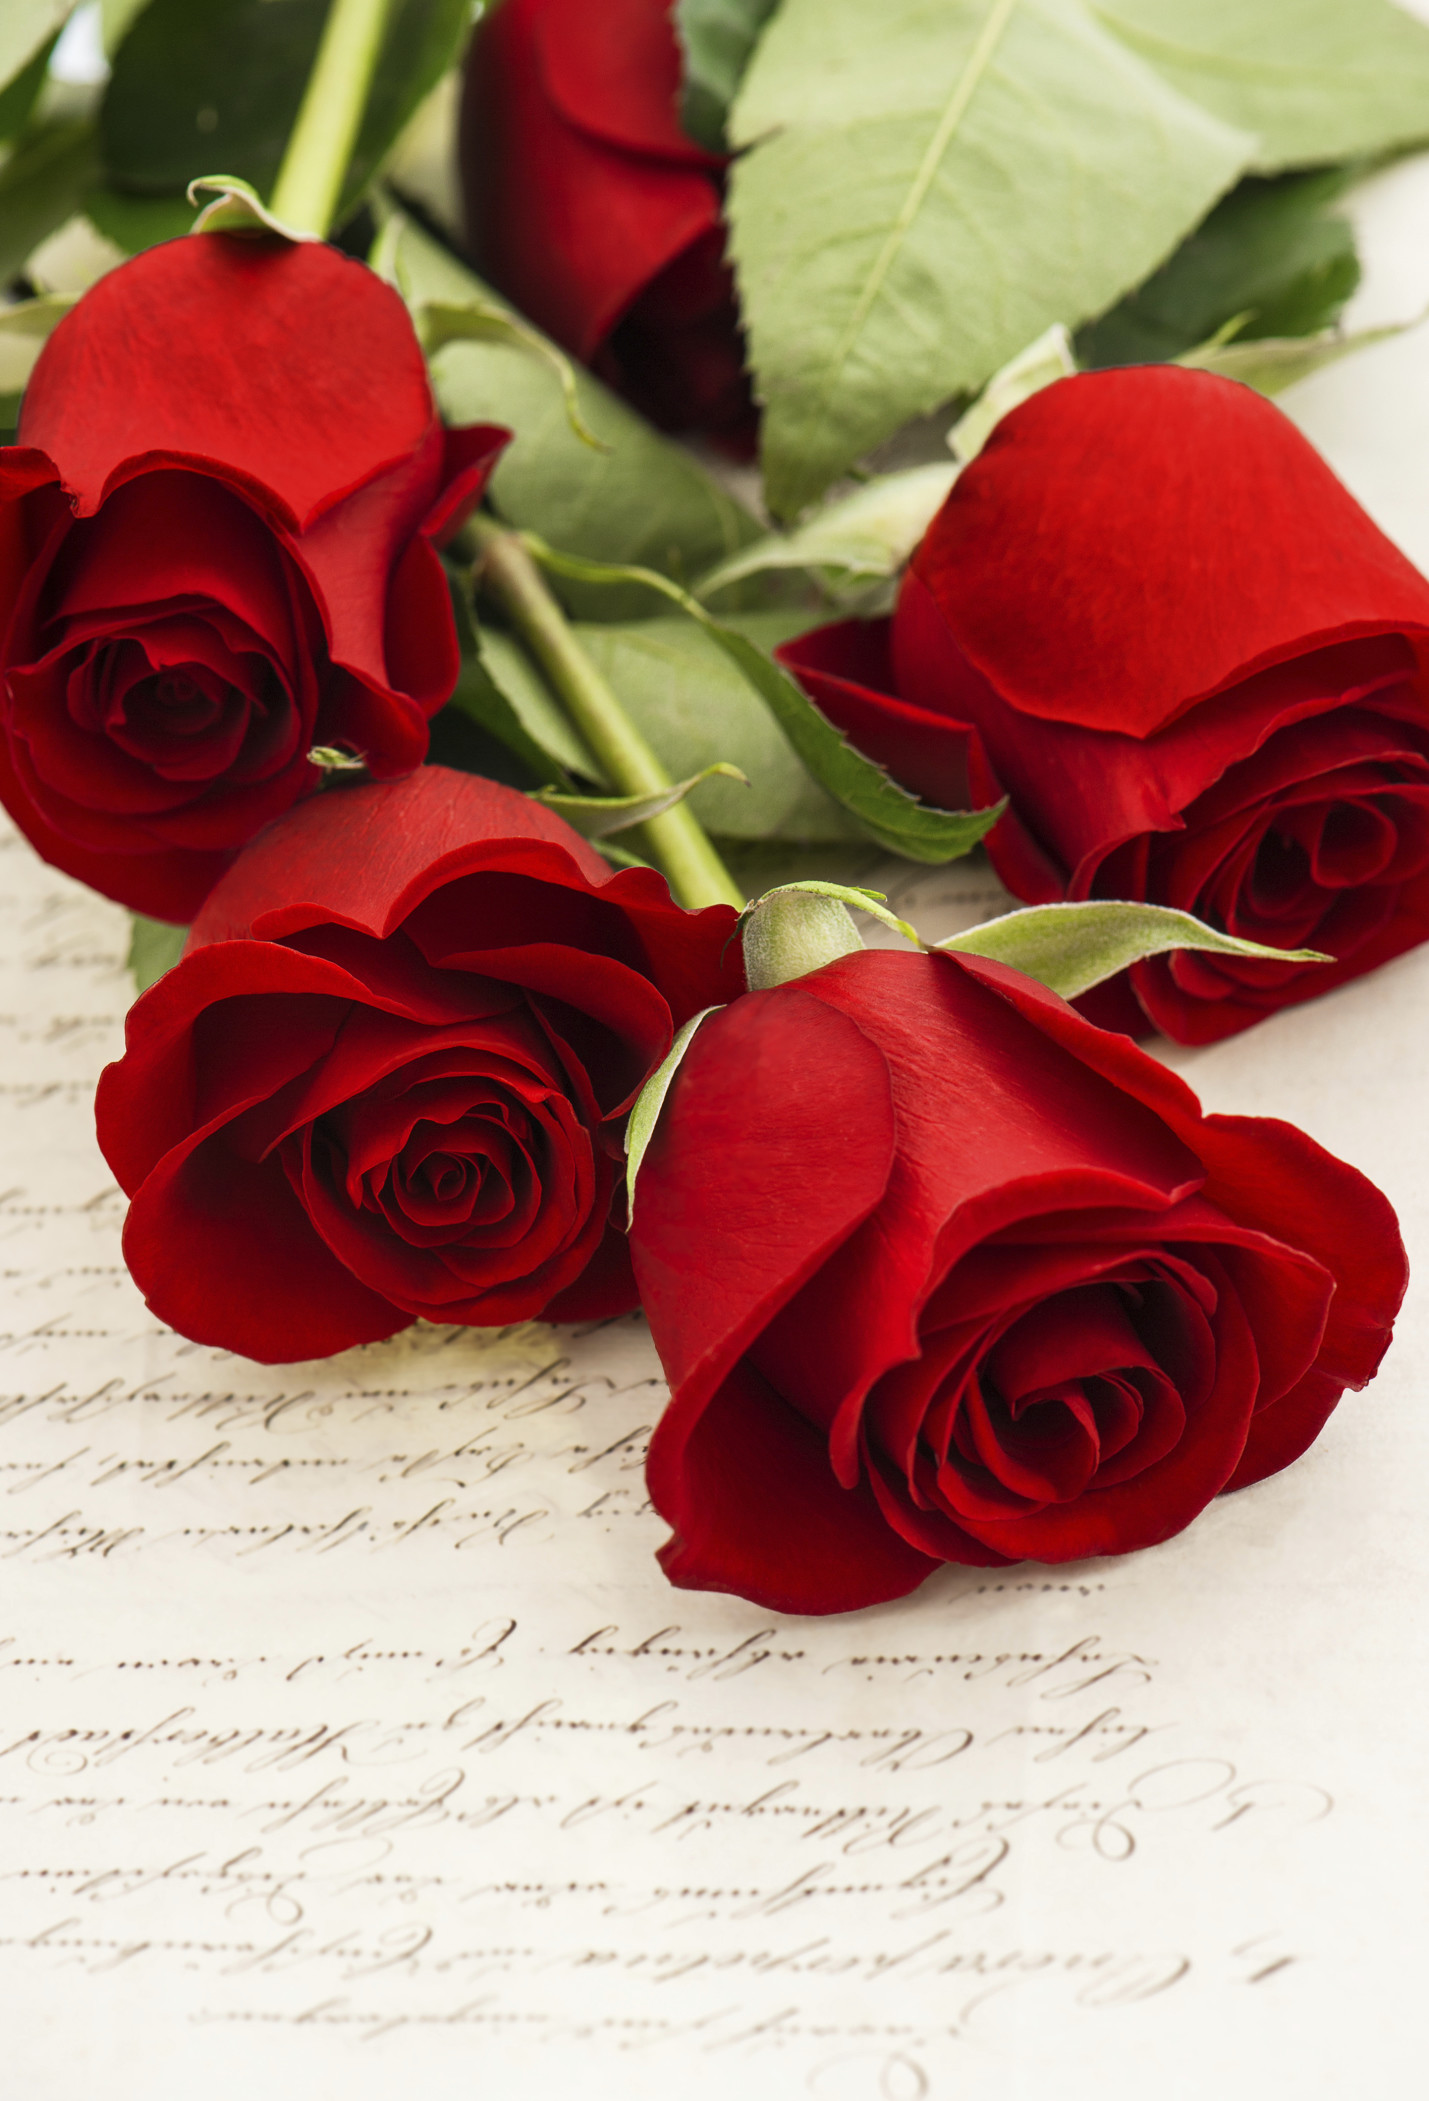 1429x2101 Check out Red roses and old love letters by LiliGraphie on Creative Market